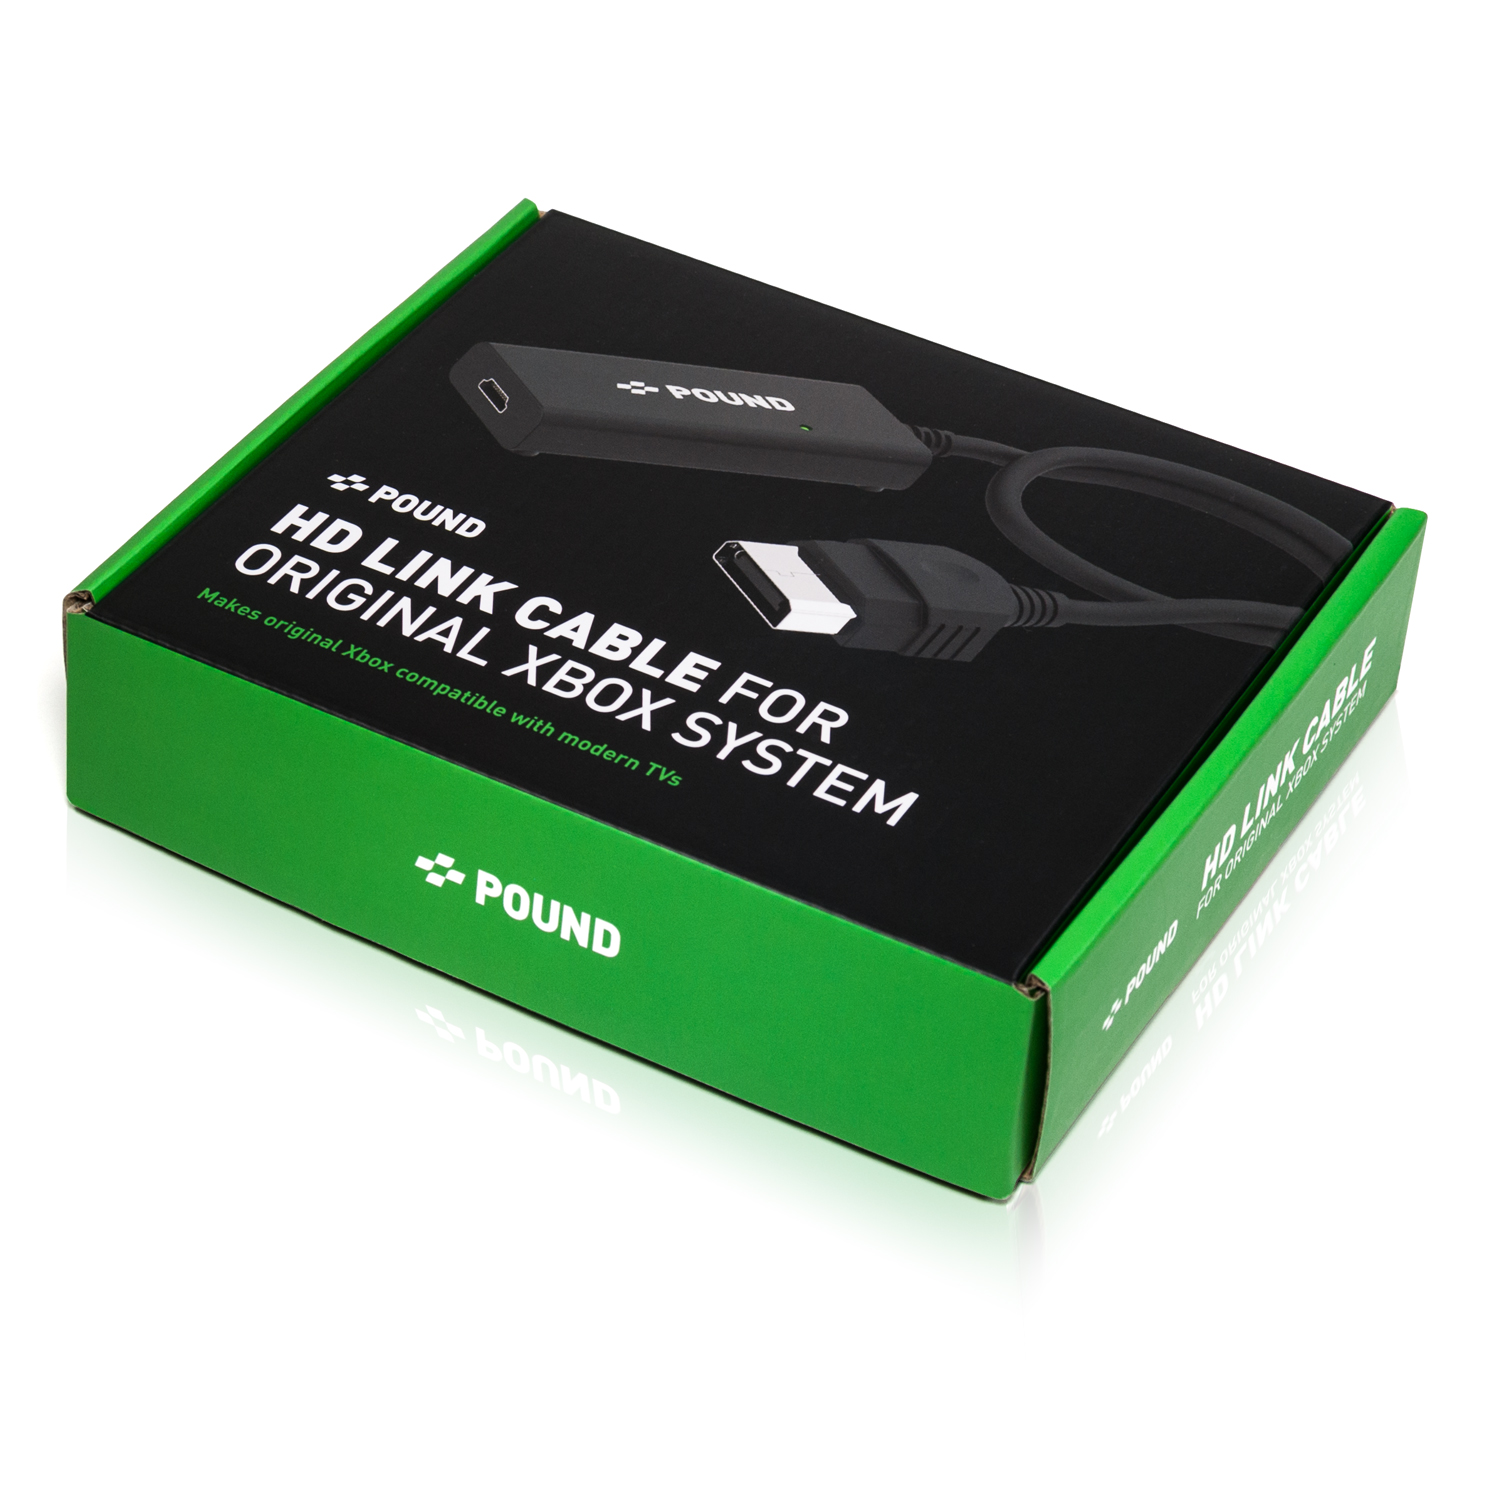 Xbox HD LINK Cable by Pound Technology